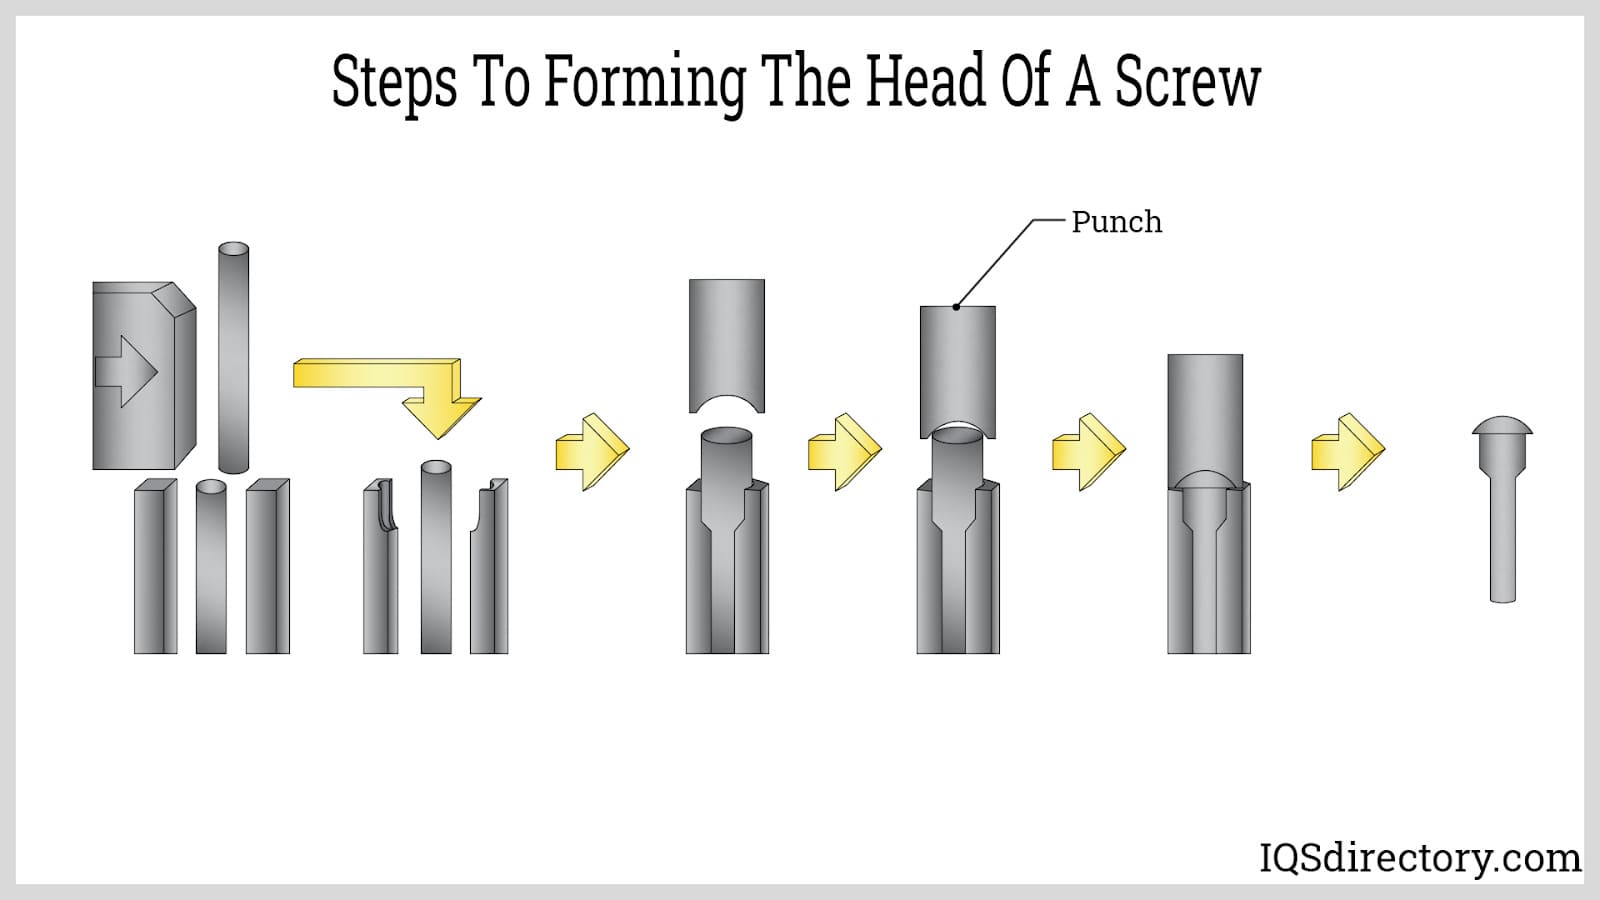 Steps to Forming the Head of a Screw